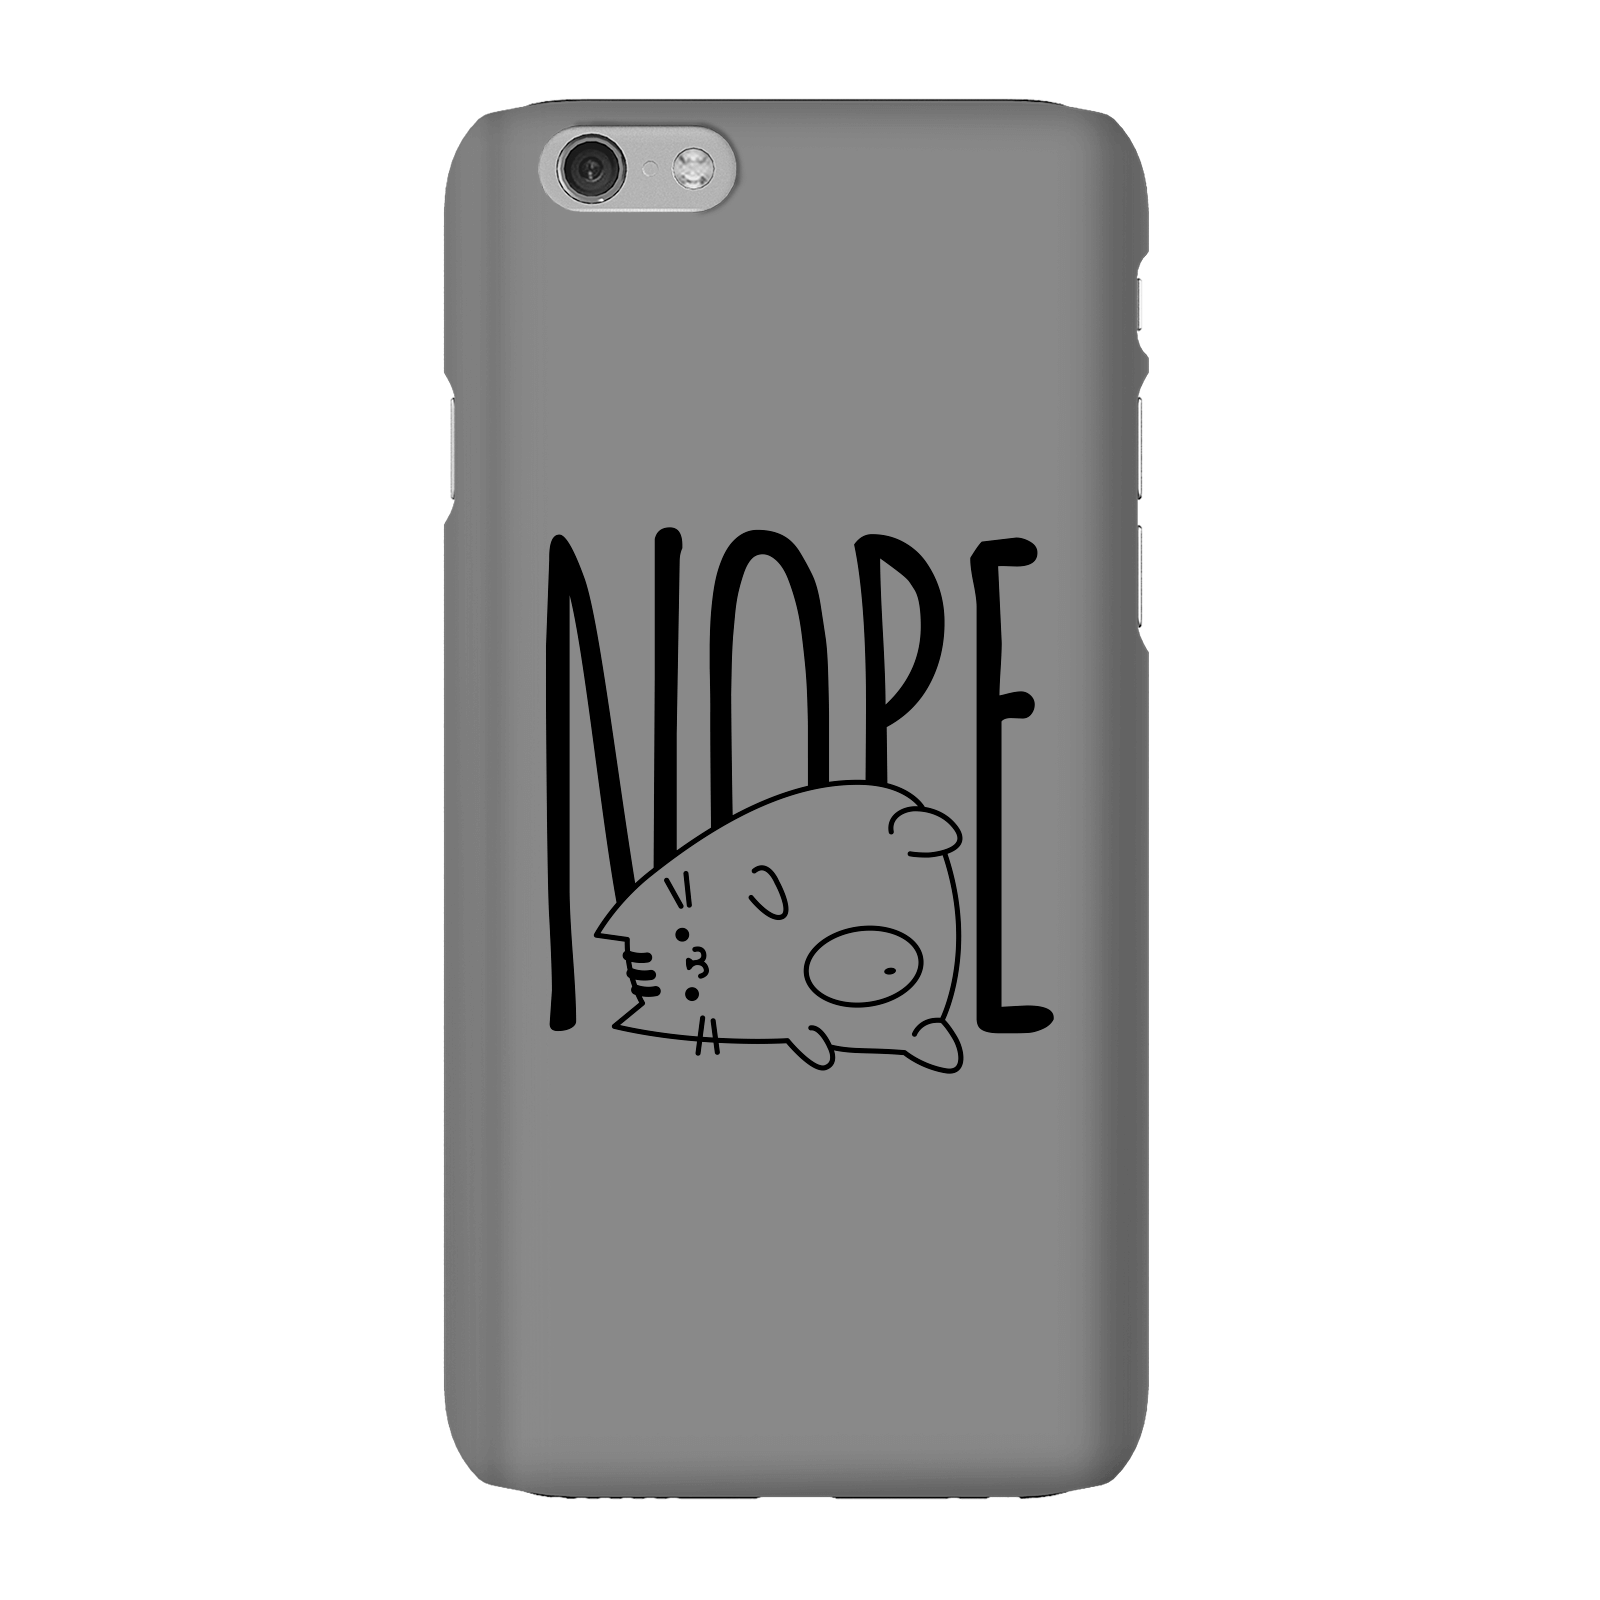 Nope Phone Case for iPhone and Android - iPhone 6 - Snap Case - Gloss